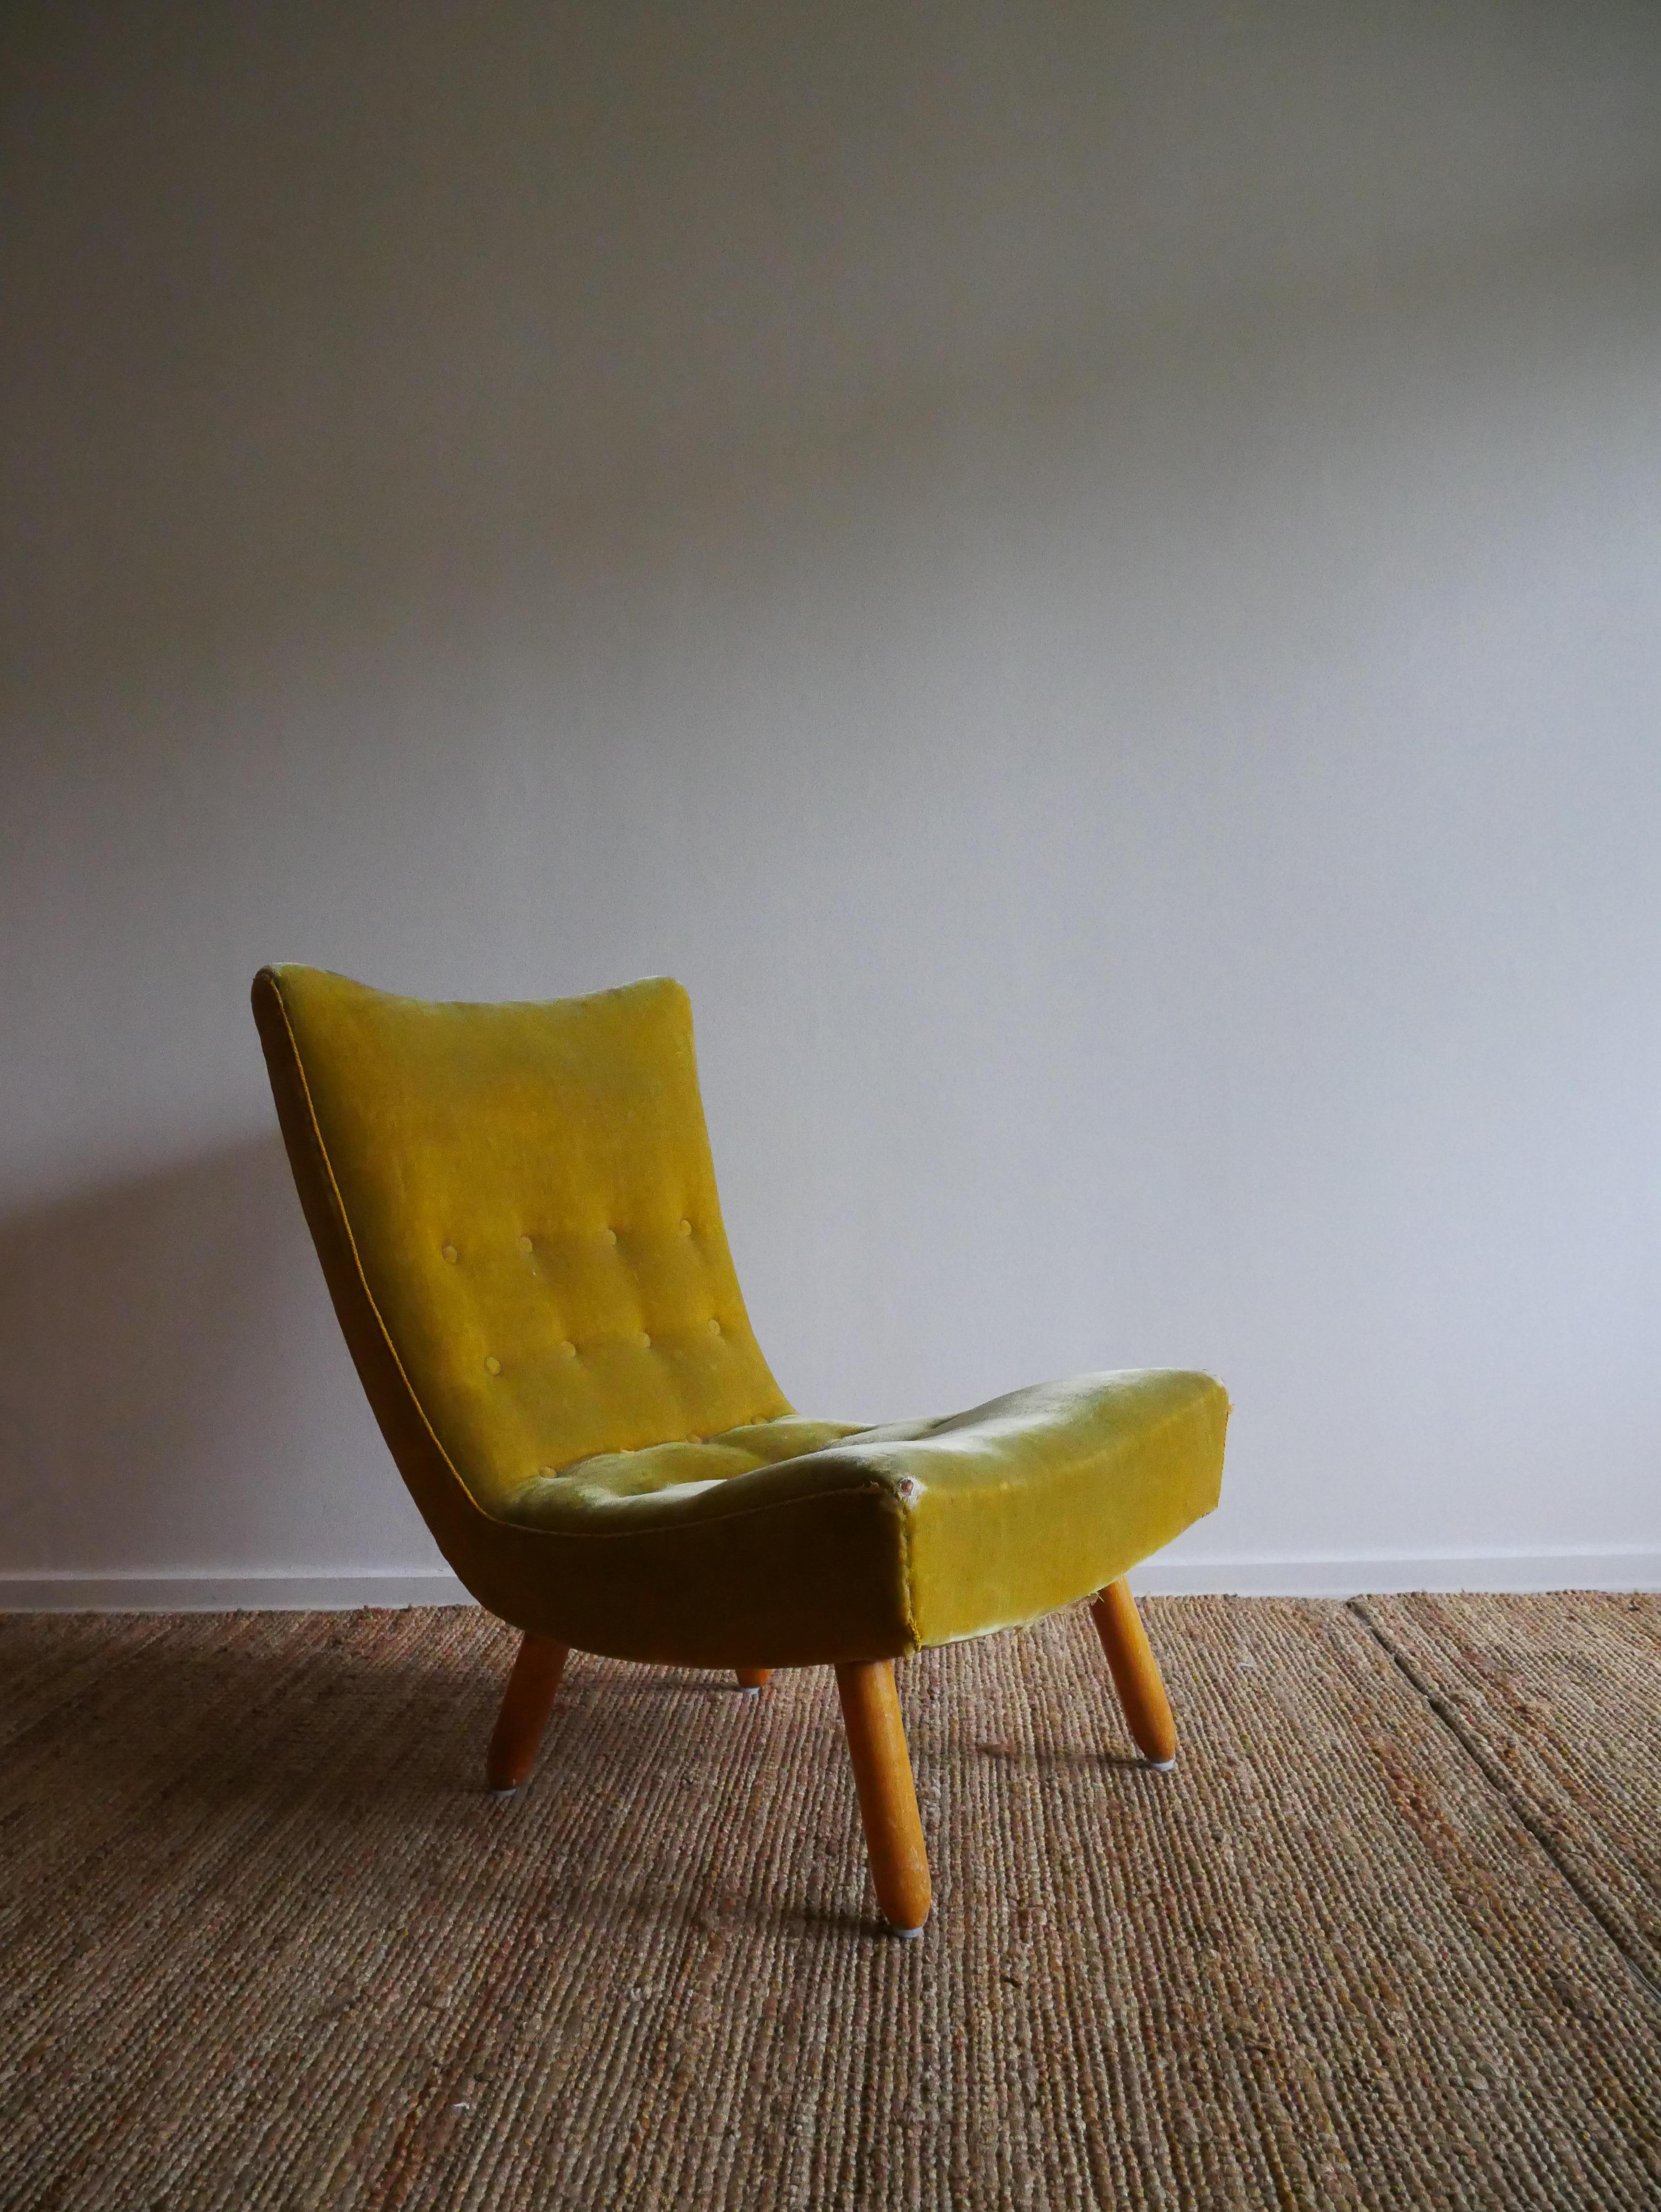 Swedish Lounge Chair
Made in 1940-50s

Beautiful shape and character,
similar to the clam chair made by Arnold Madsen

Height: 82 cm
Width: 57 cm
Depth: 50 cm
Seat Height: 39 cm